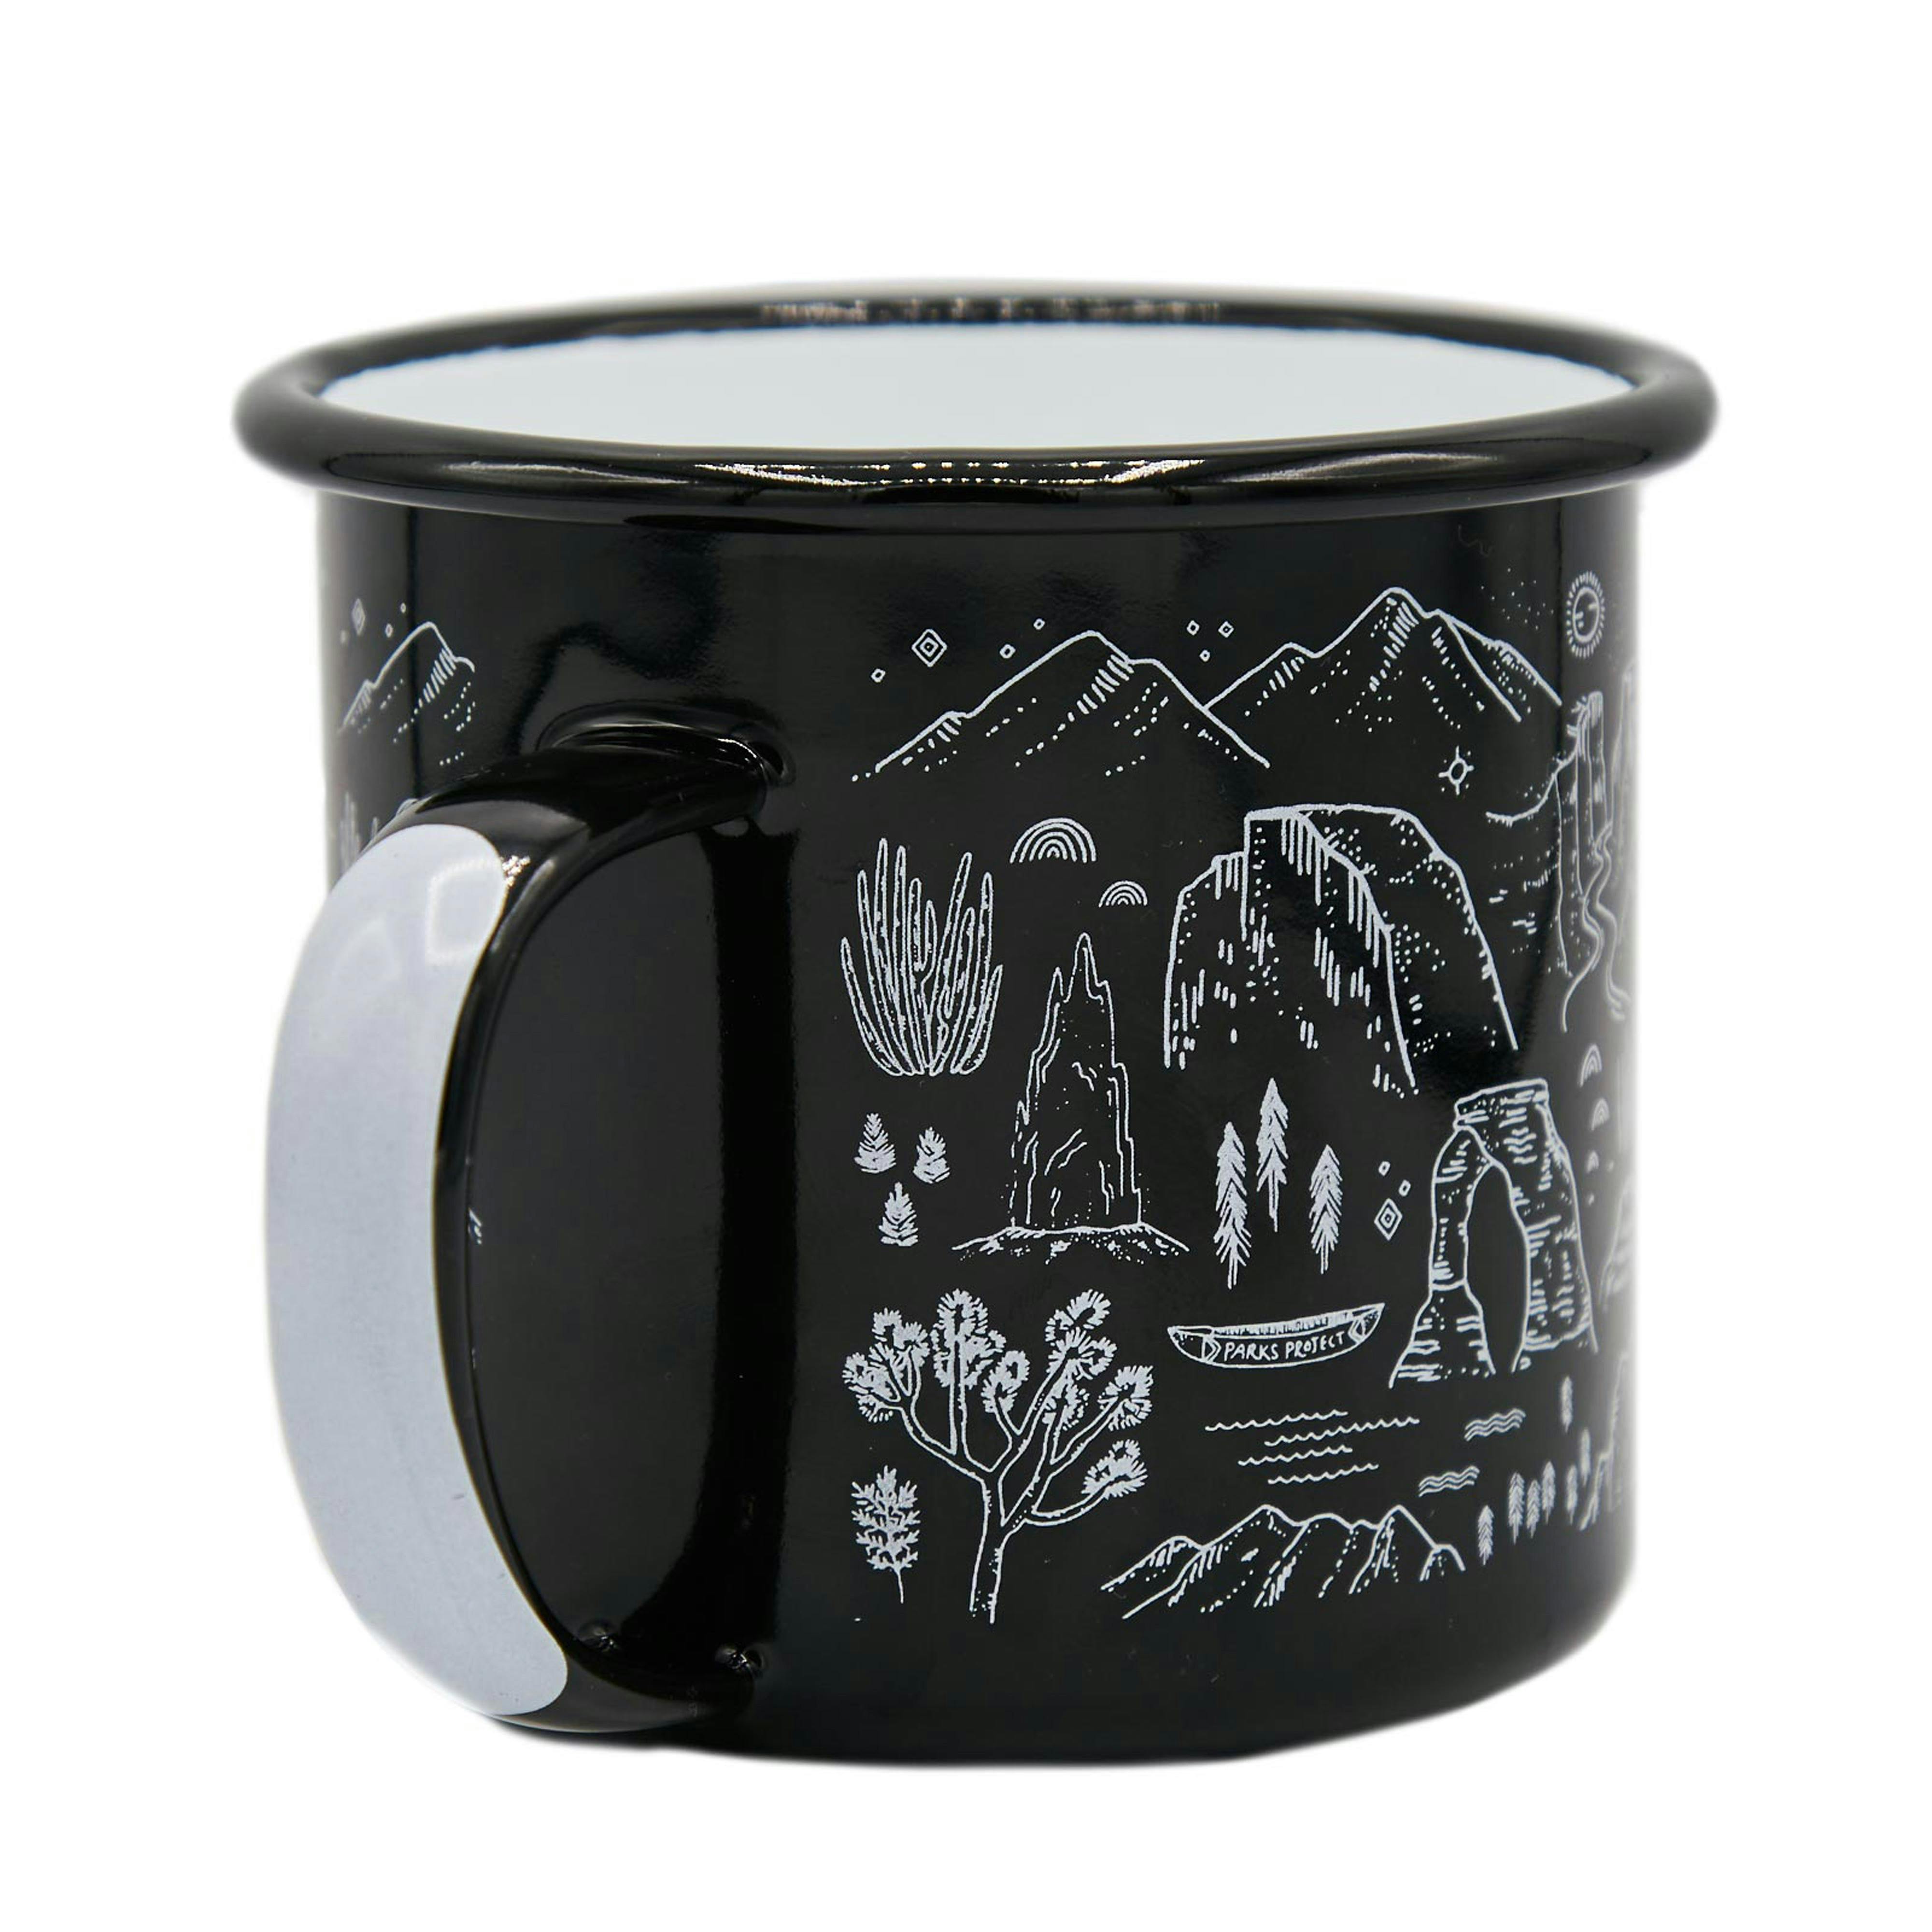 Enamel Camping Mug - The New Jersey School of Conservation